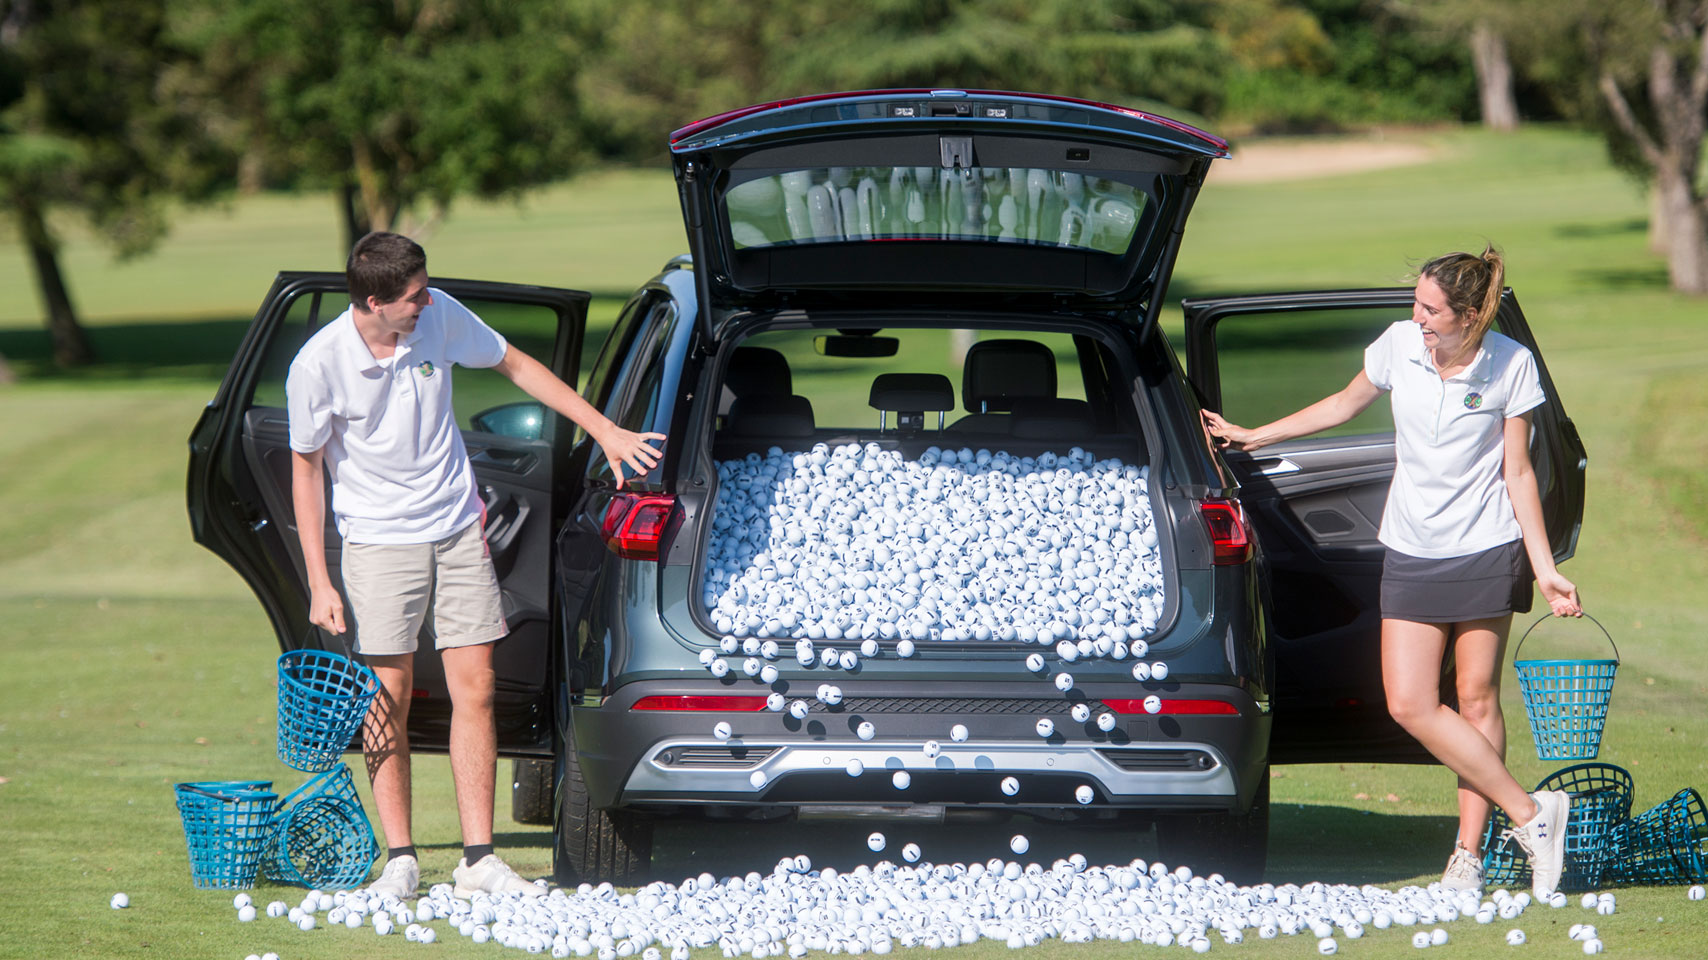 How many golf balls fit in the boot of a Tarraco